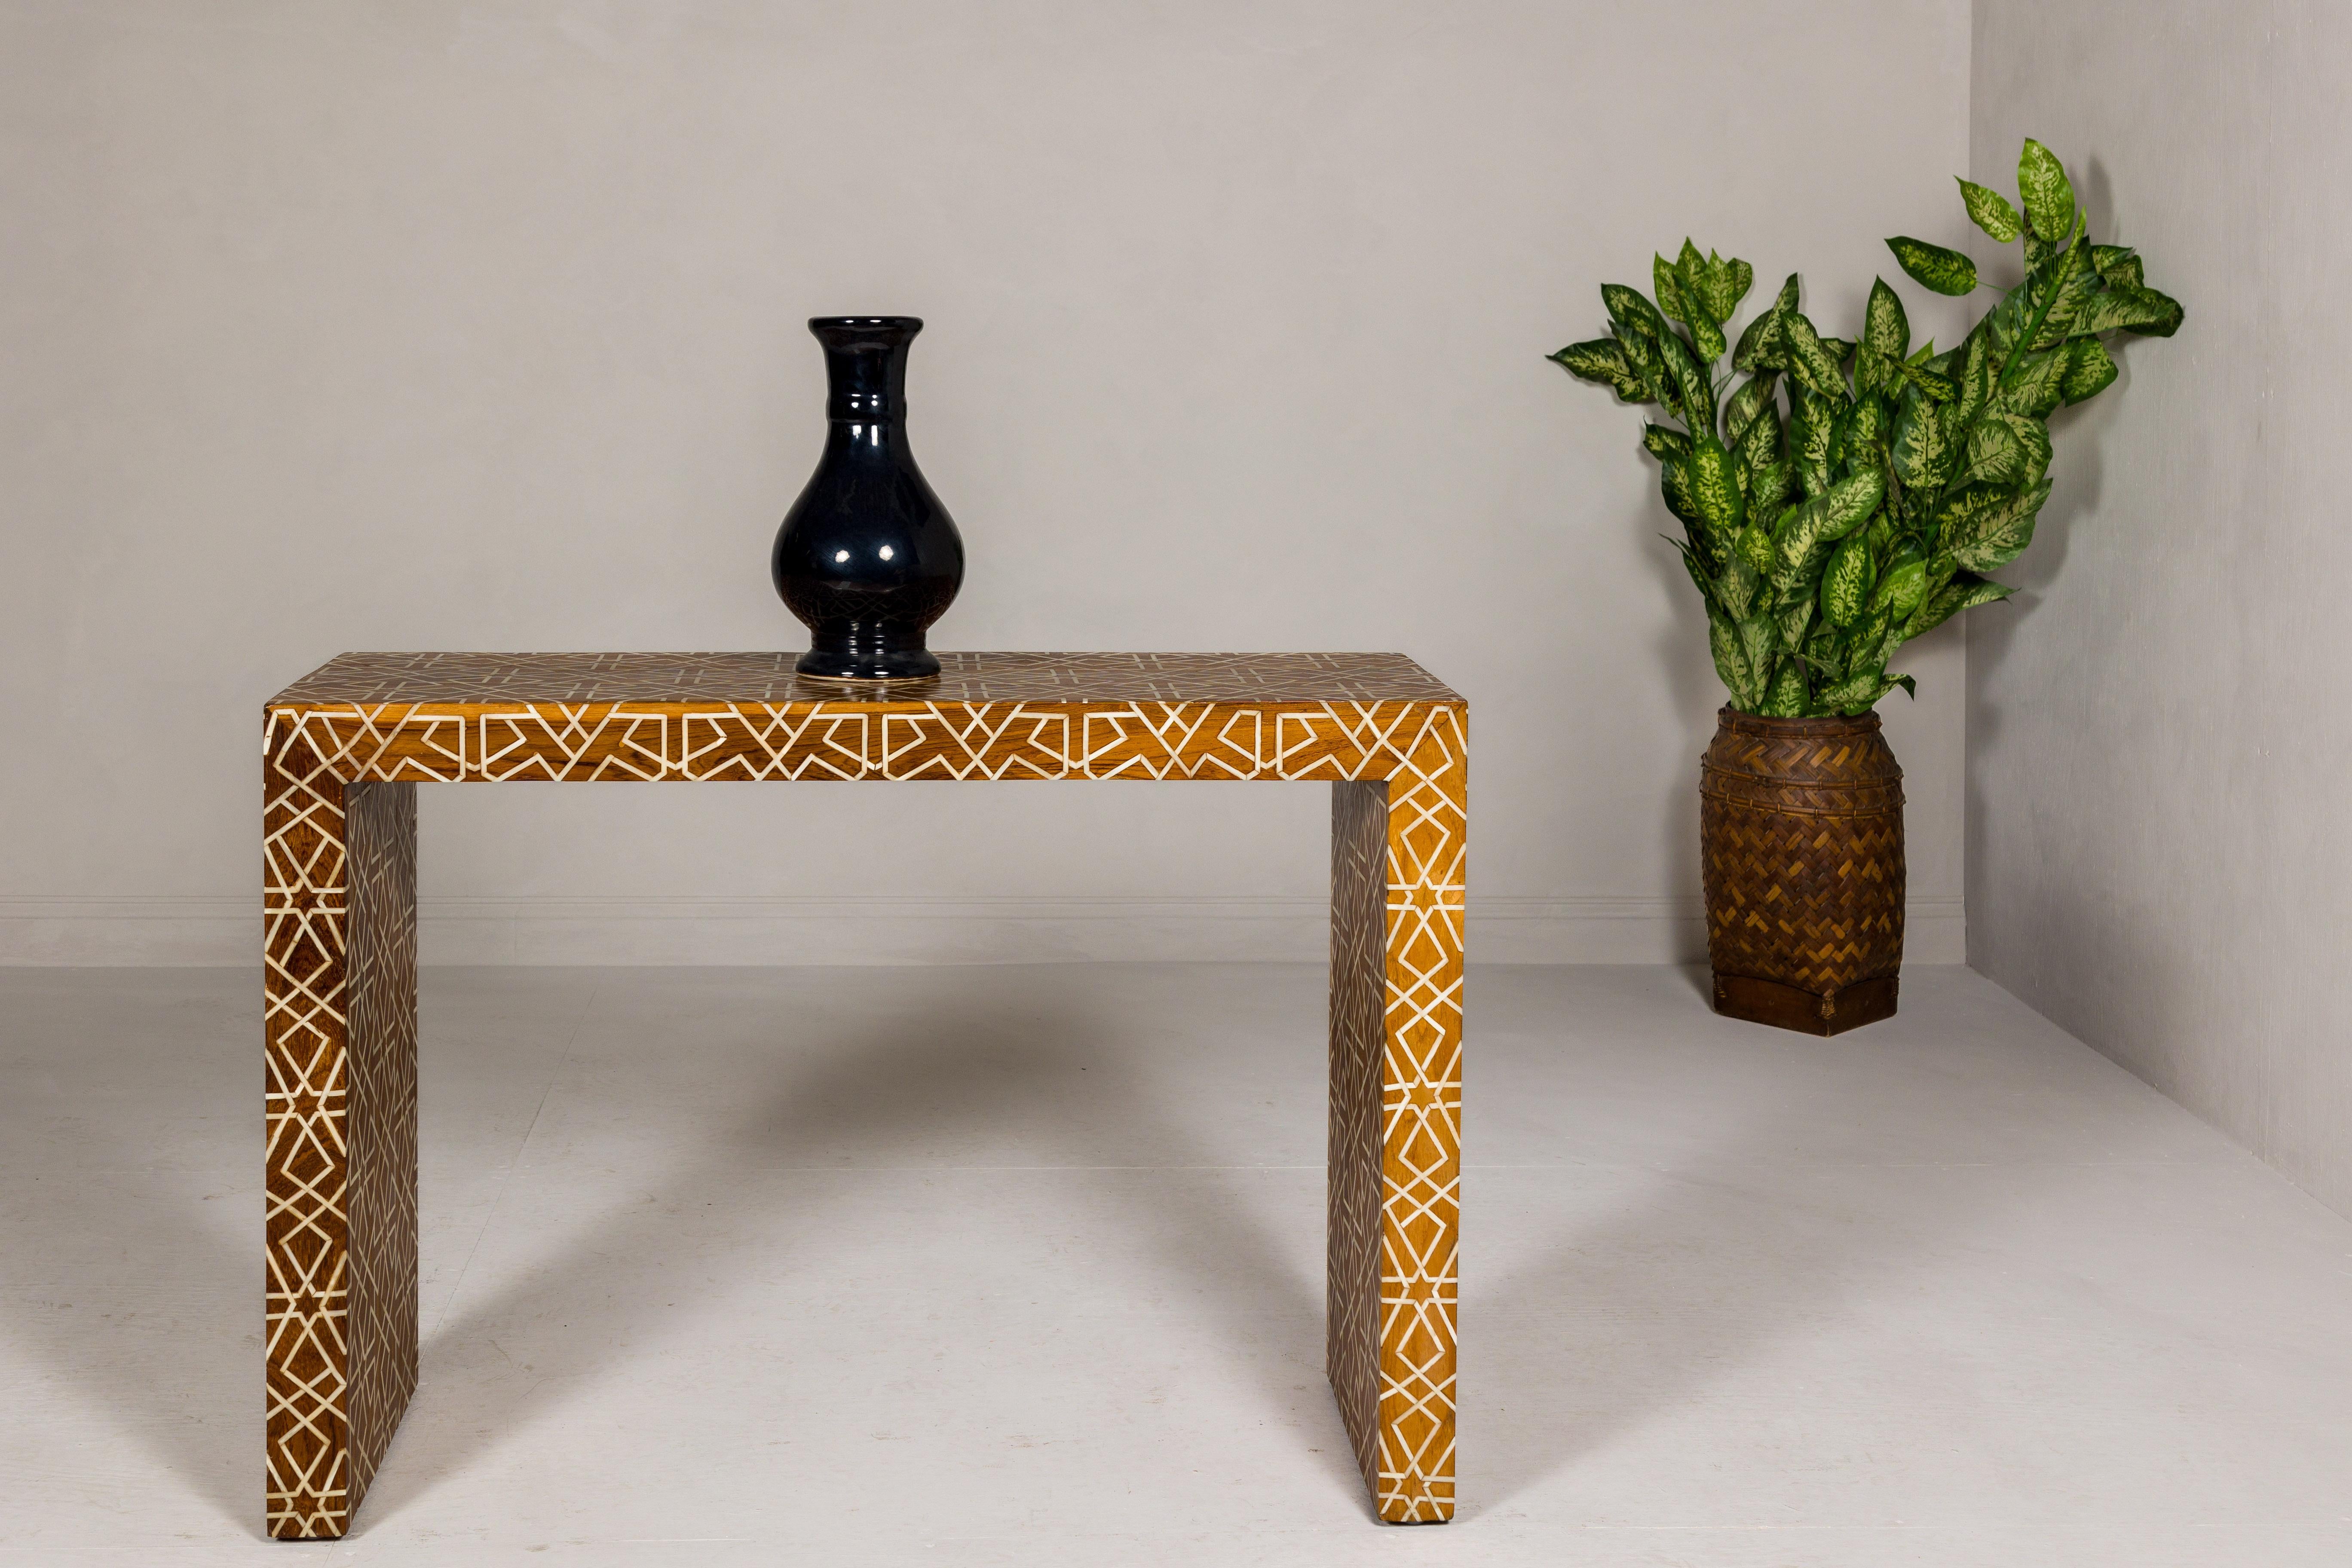 A handmade mango wood linear console table with geometric bone inlay. Capturing the essence of contemporary artistry and time-honored craftsmanship, this handmade mango wood console table is a true work of art. Intricate geometric bone inlay